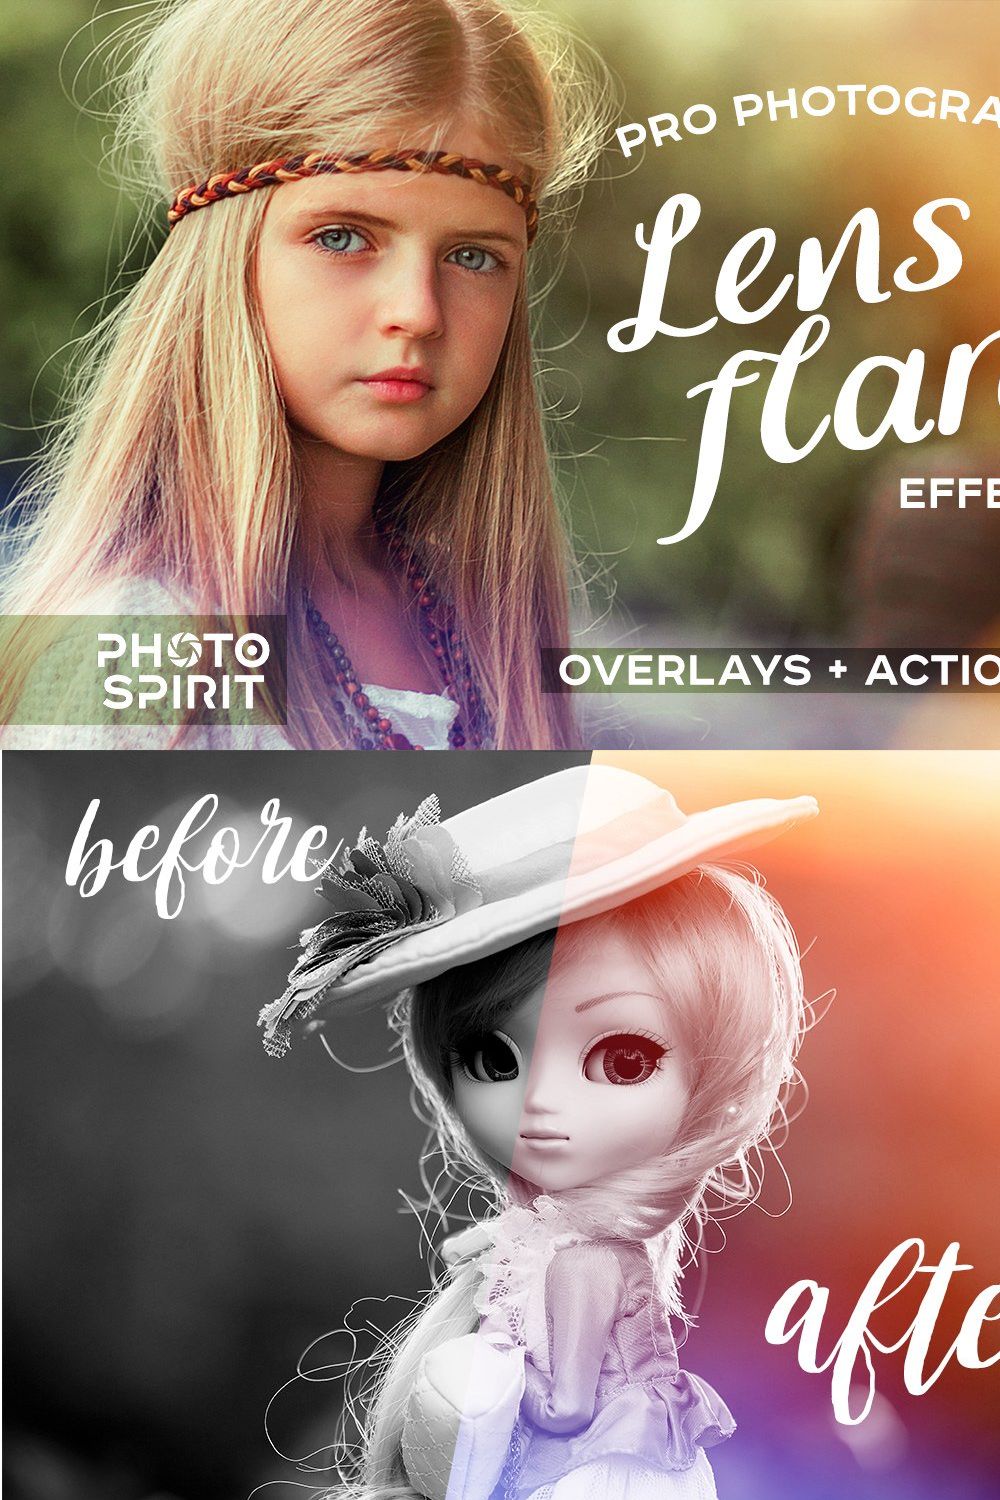 Pro Photography Lens Flare Overlays pinterest preview image.